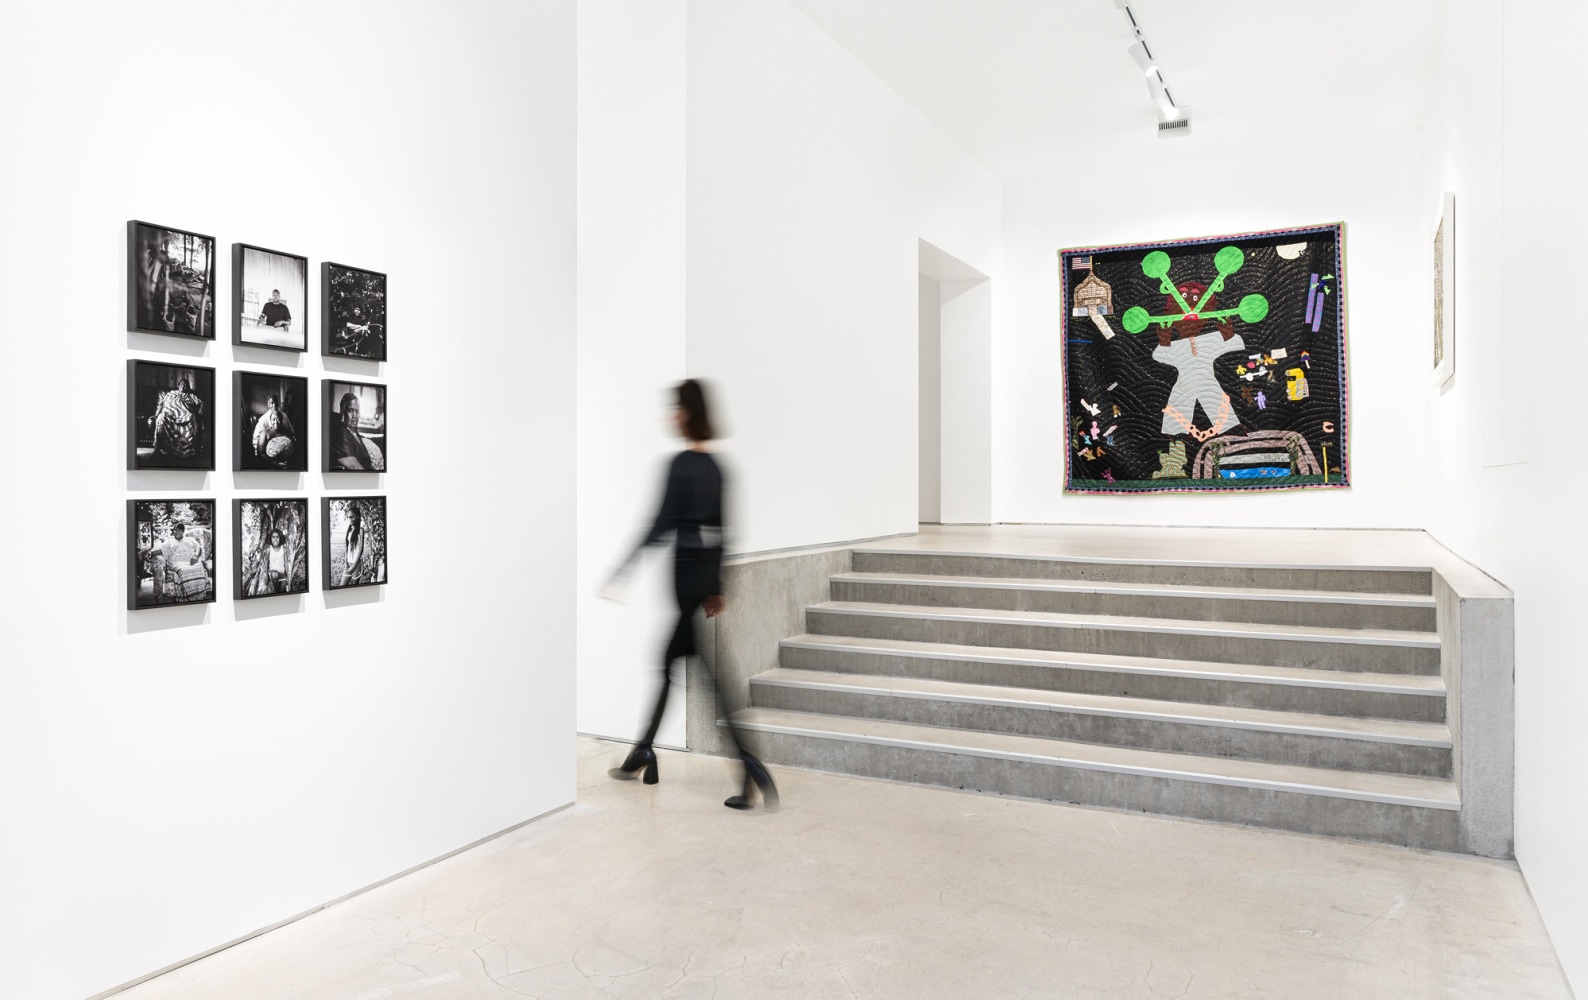 Pictured: Exhibition installation views. Photo: Mike Derez. &amp;copy; The Artists. Courtesy of the artists, Galerie Marguo and&amp;nbsp;Fort Gansevoort.